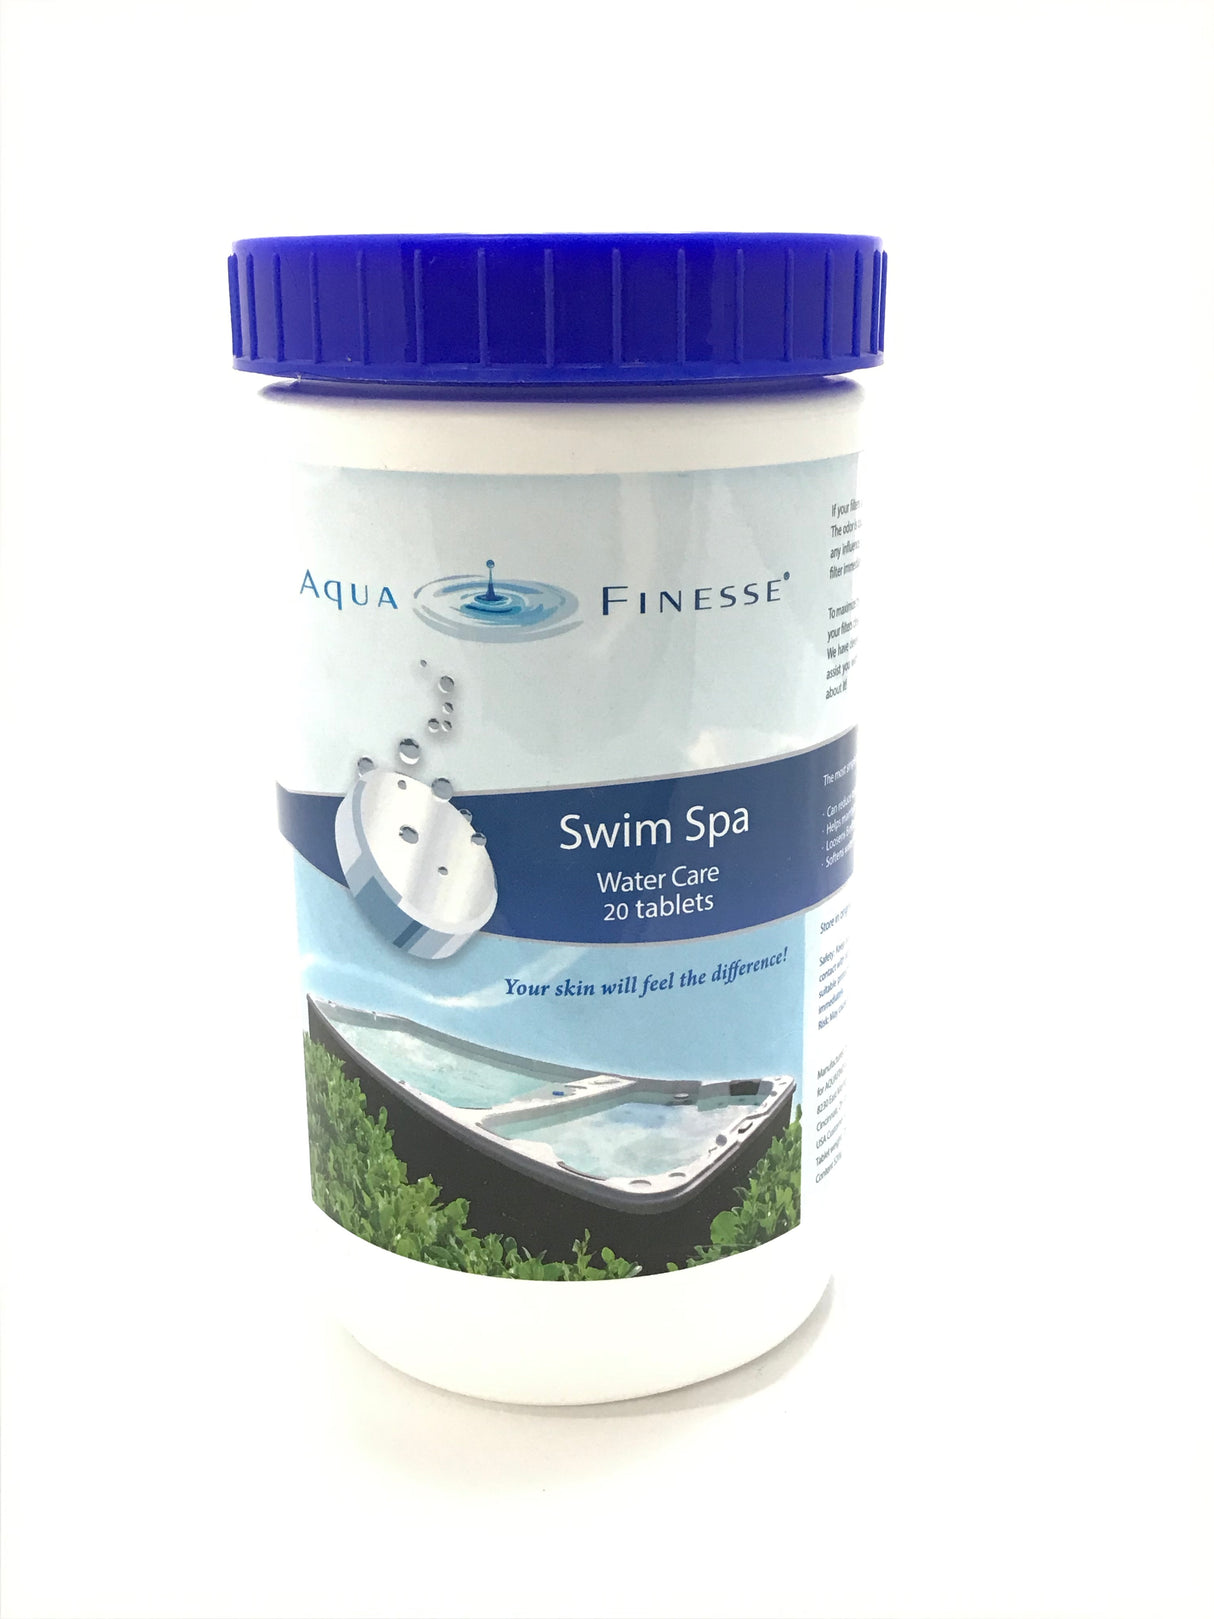 AquaFinesse Swim Spa Water Care Tablets - Filter Cleaners - 20 count